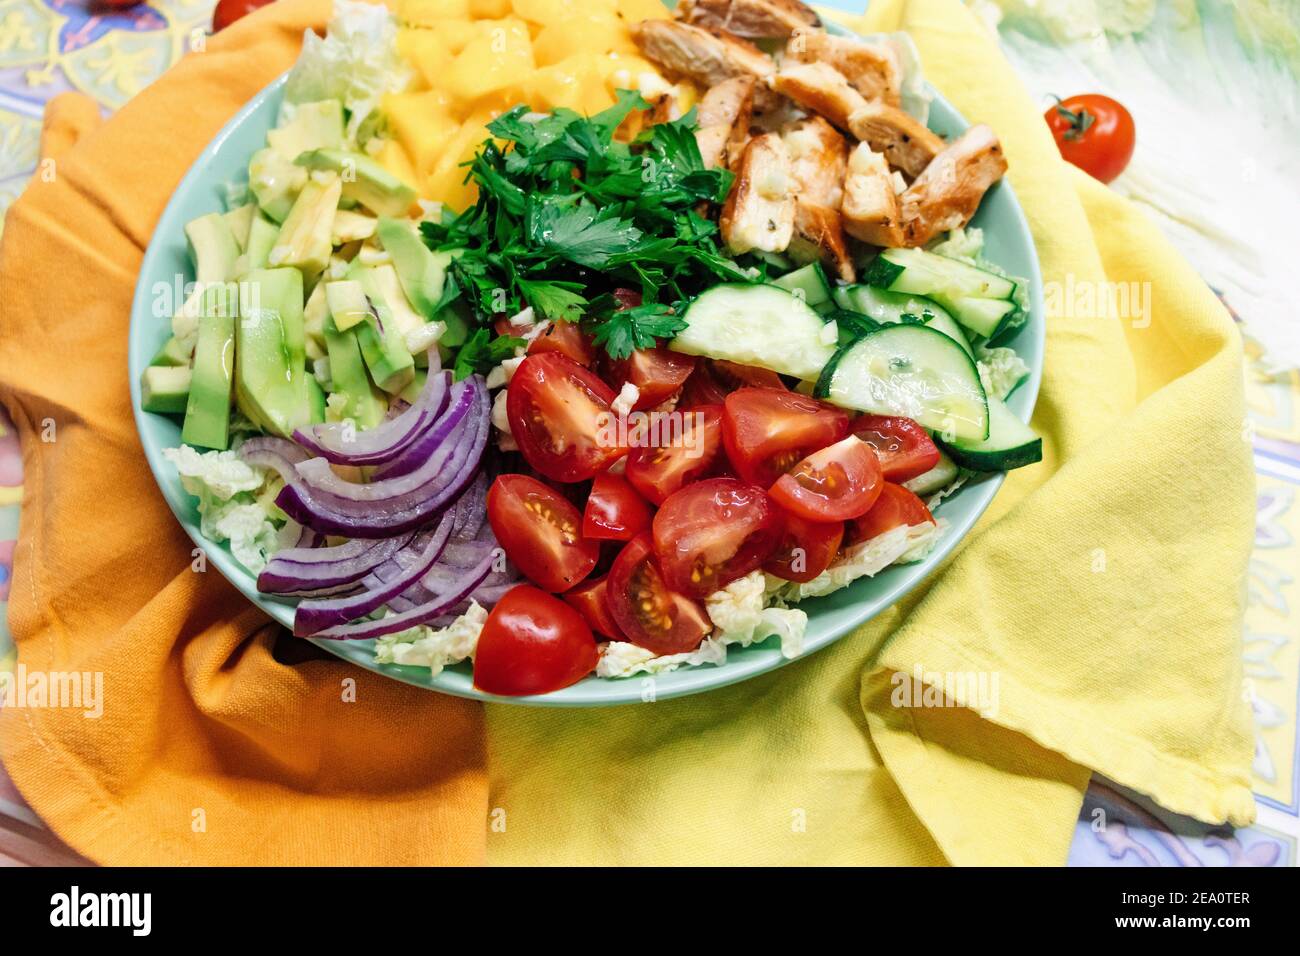 Chicken paleo diet salad nutrition with meat, yelloe mango, avocado and fresh vegetables ingredients in bowl on colorful background Stock Photo